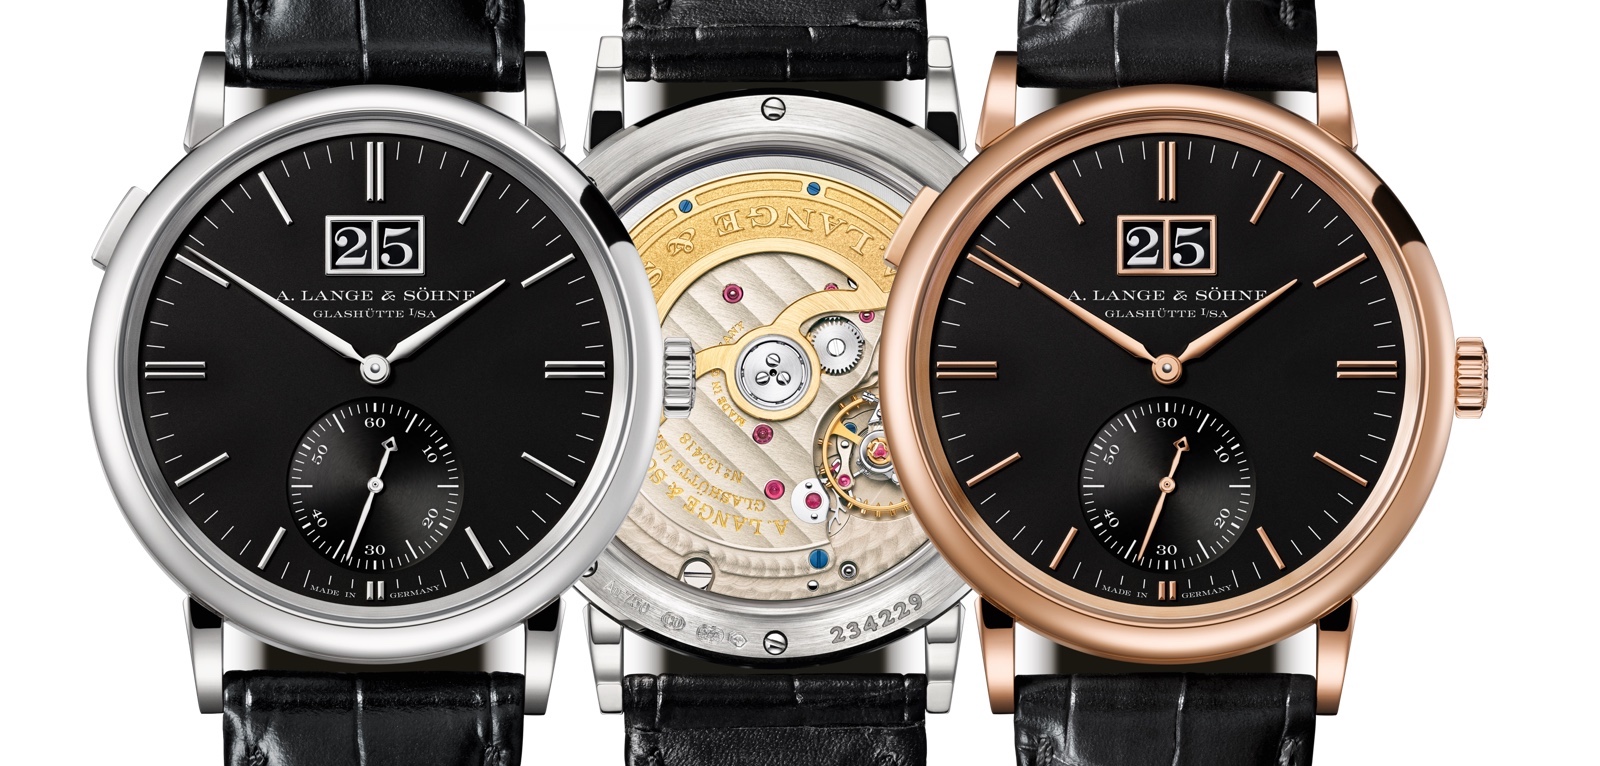 A. Lange & Sohne Saxonia Outsize Date Cover